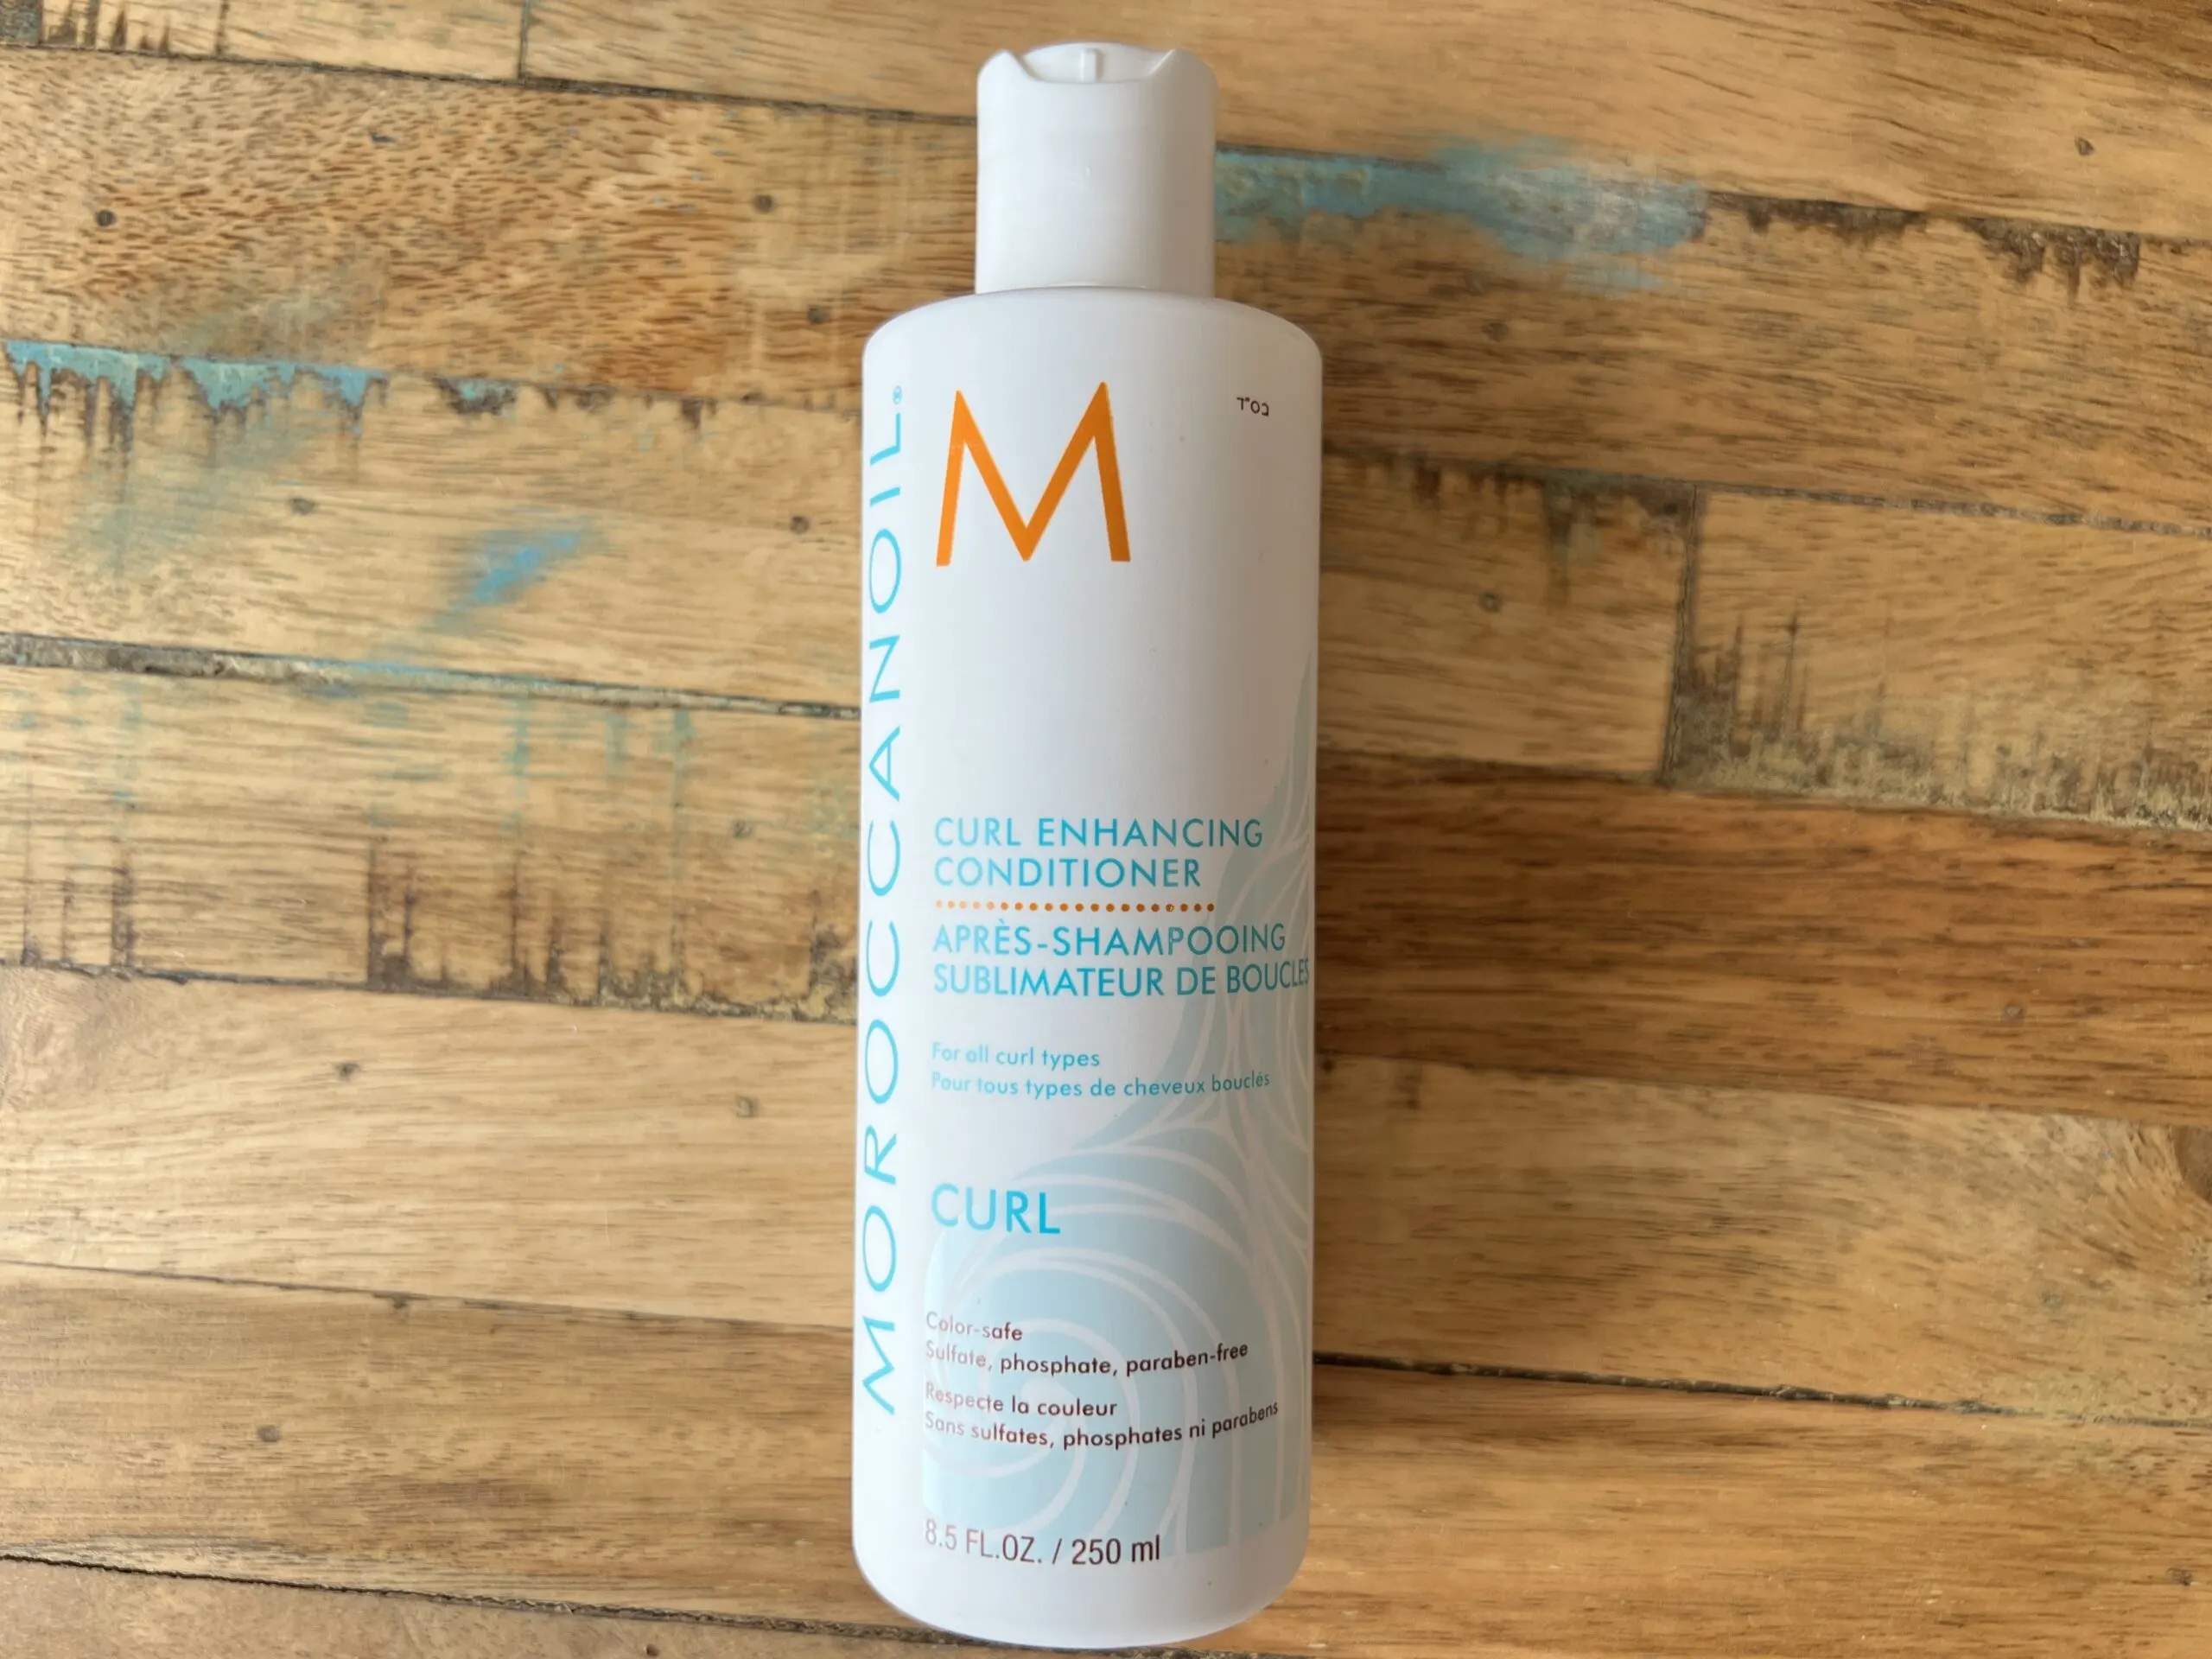 Moroccanoil Curl Enhancing Conditioner for all curl types is color-safe, sulfate, phosphate, and paraben-free.